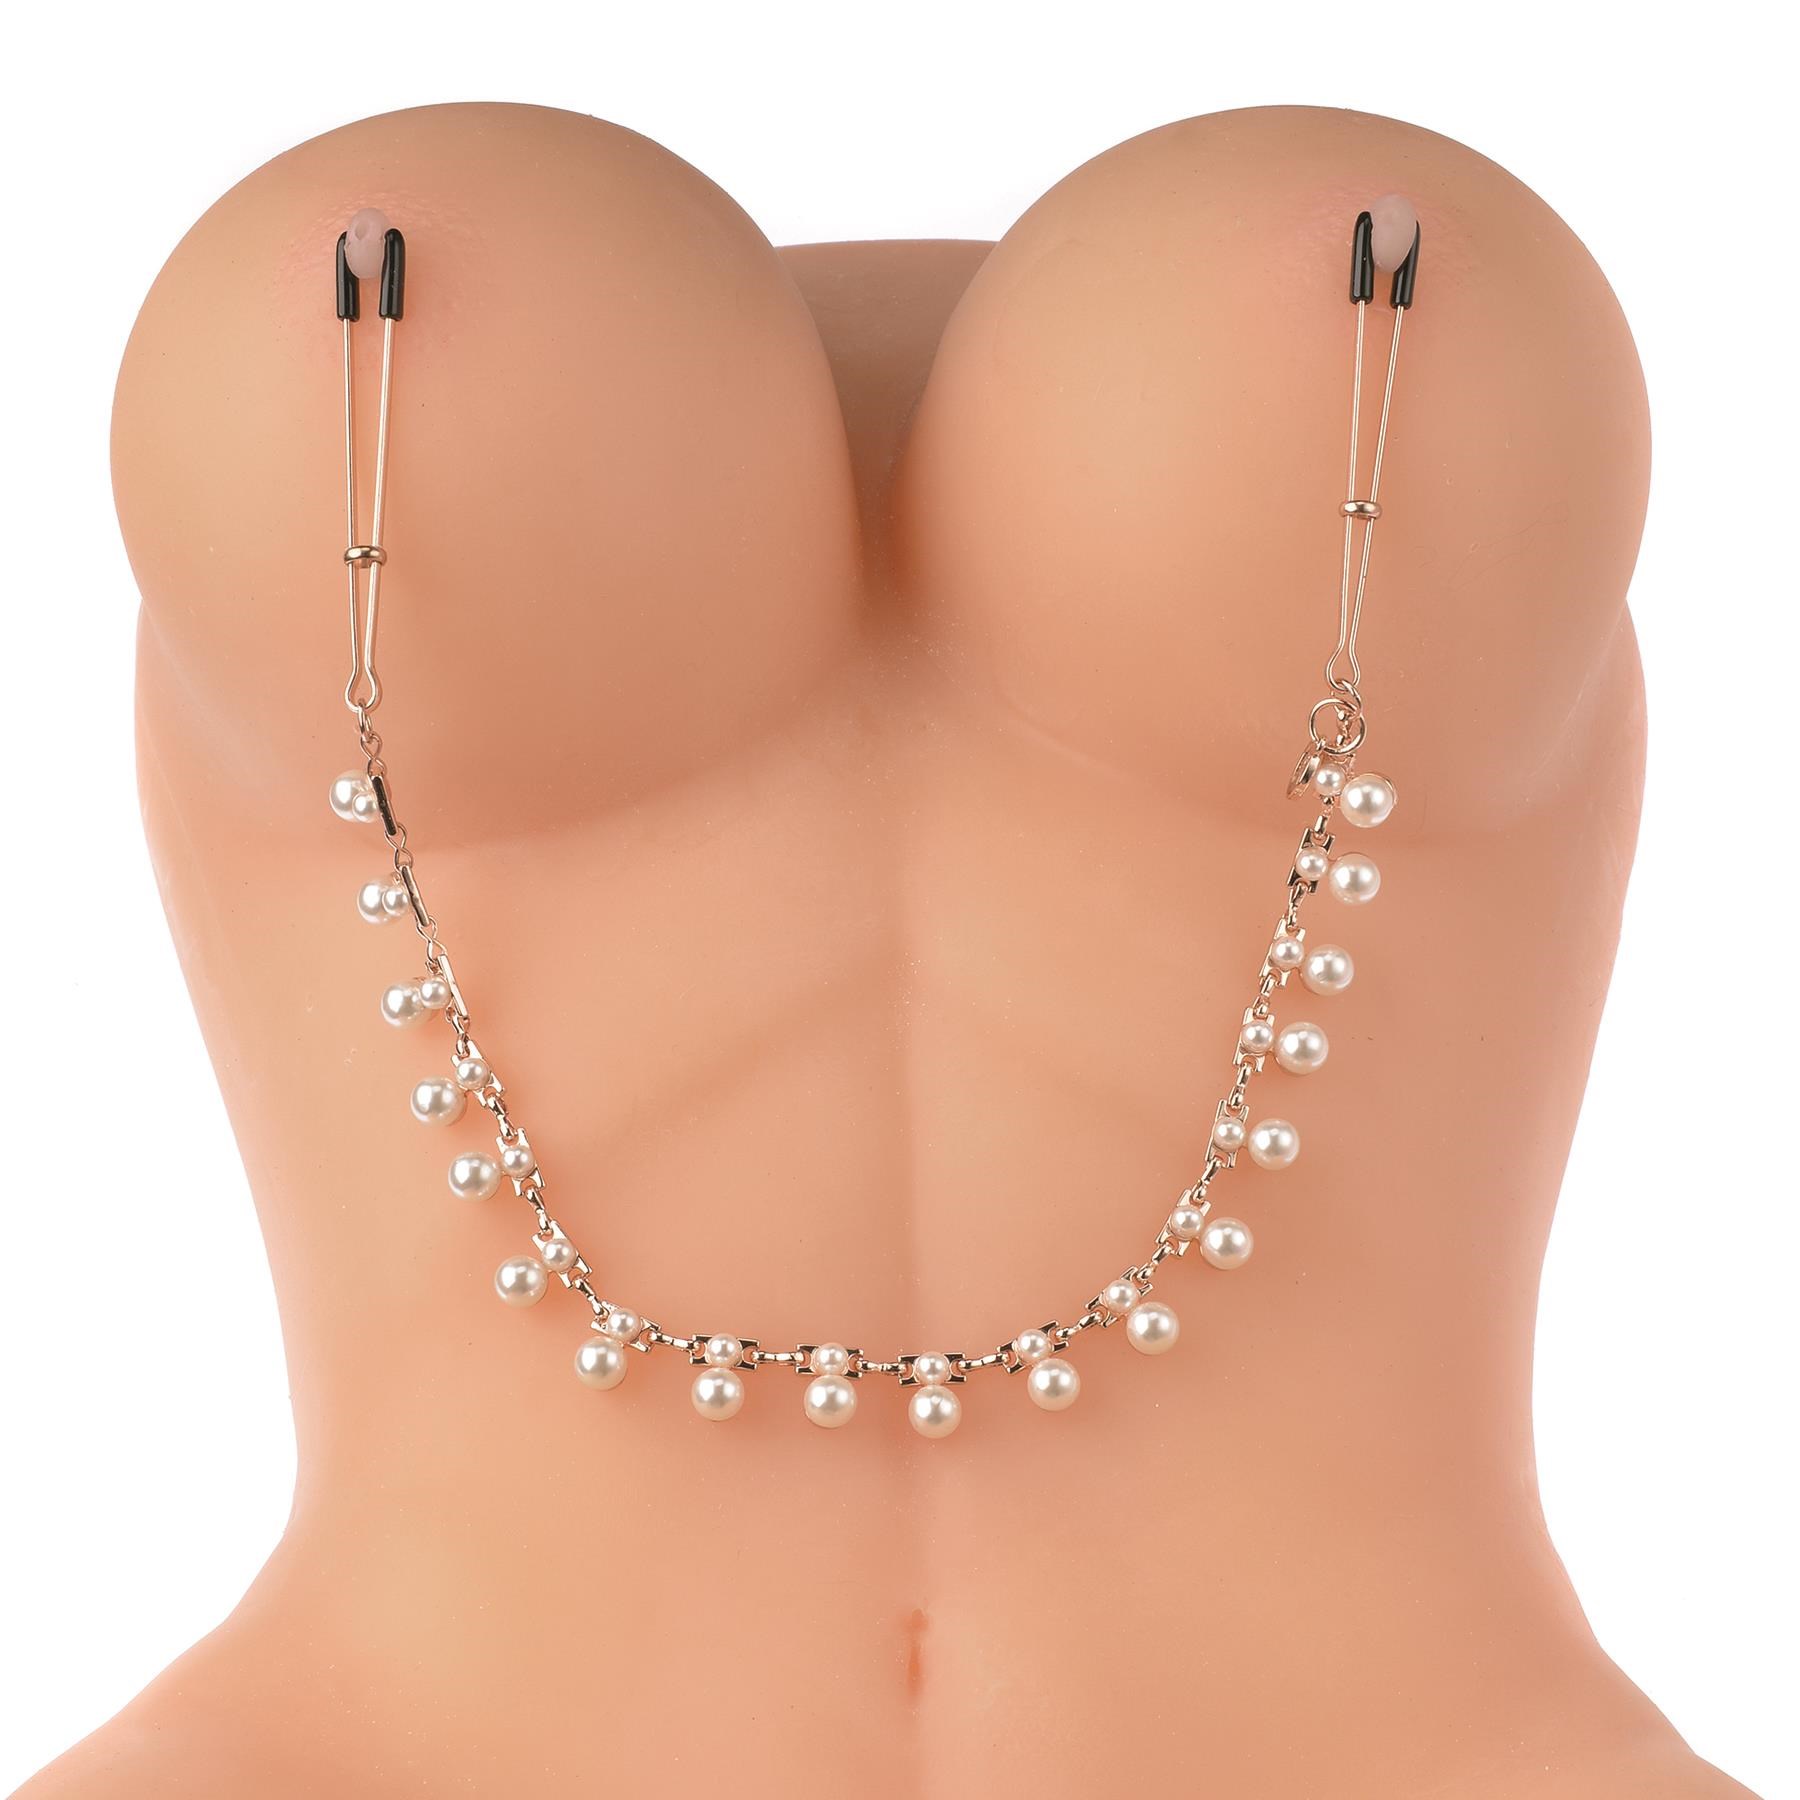 Secret Kisses Pretty In Pearls Nipple Clamps Product on Mannequin